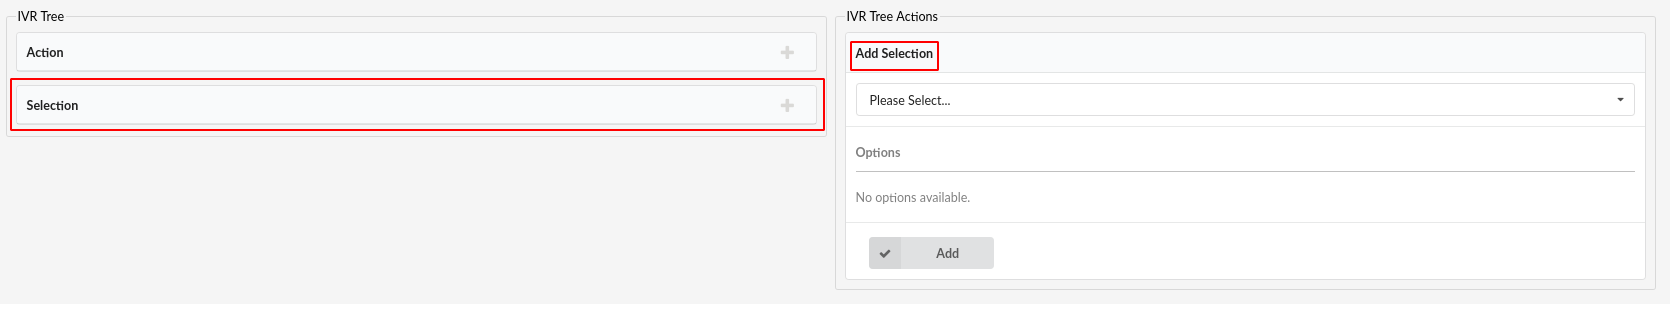 add-selection-ivr.png